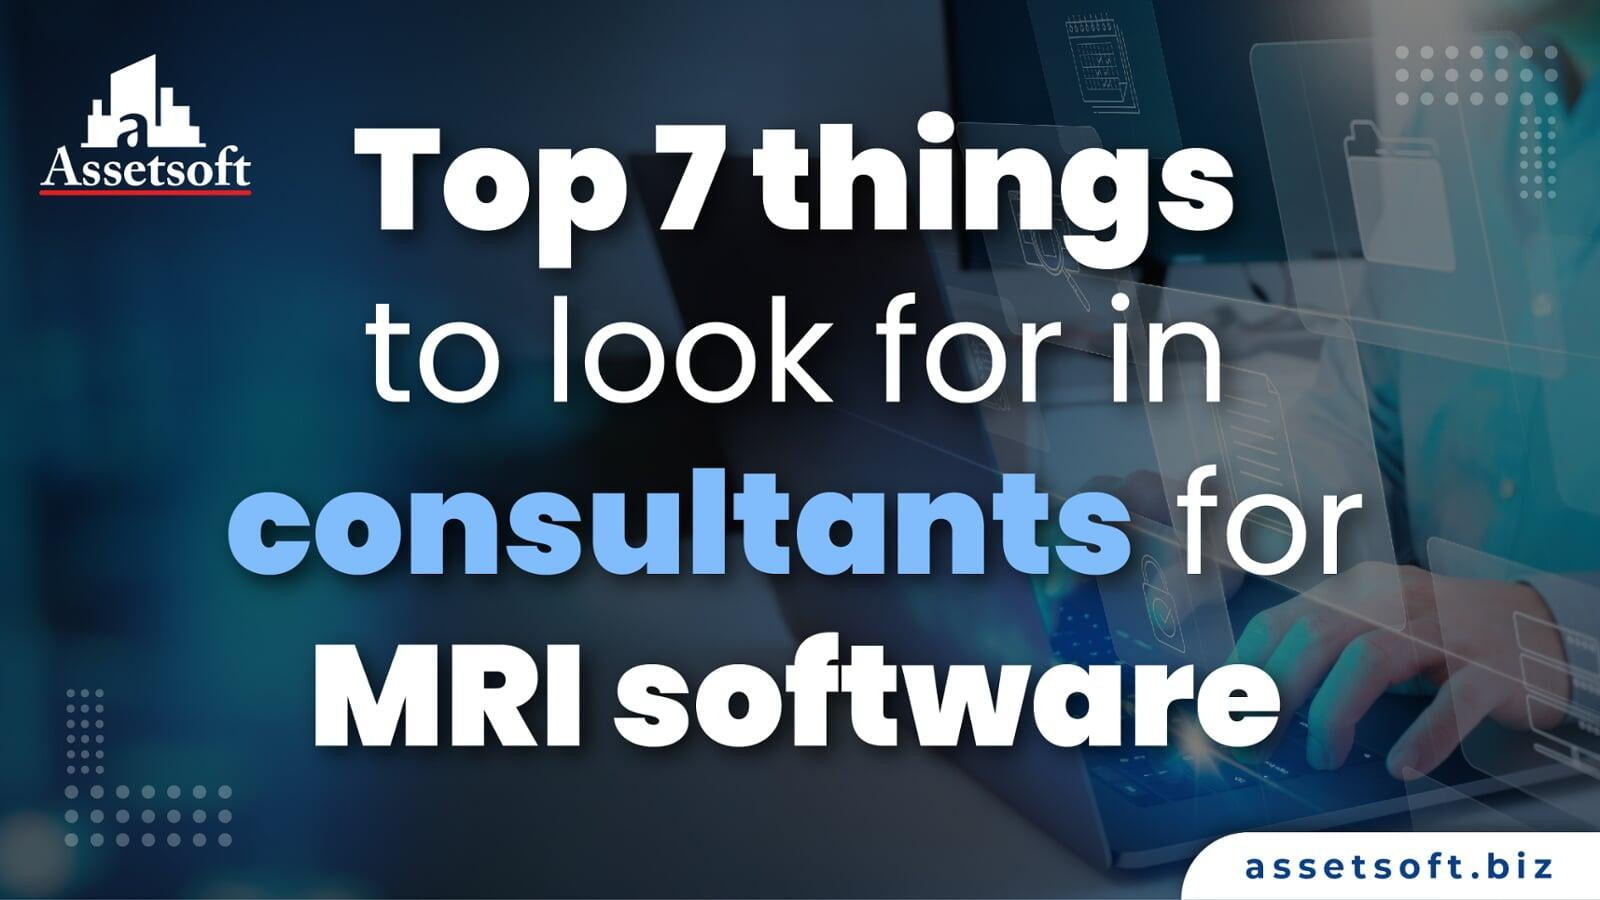 Top 7 things to look for in consultants for MRI software 